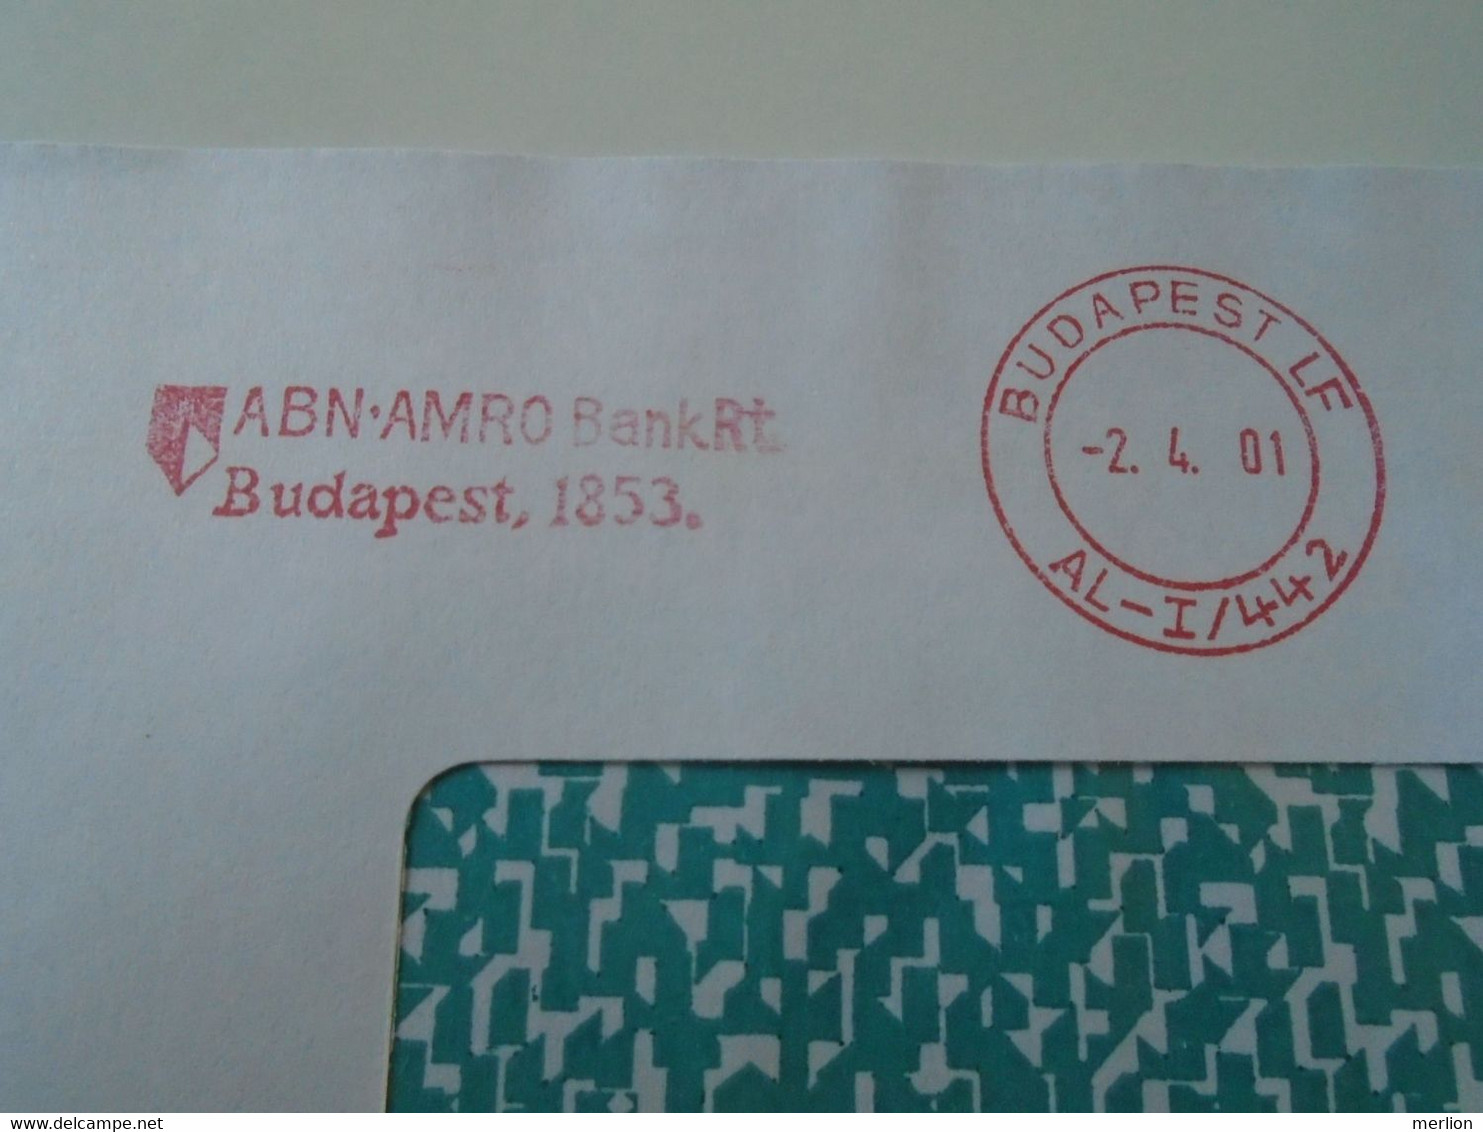 AD00012.118  Hungary Cover  -EMA Red Meter Freistempel-   2001   Budapest  ABN AMRO  Bank - Machine Labels [ATM]